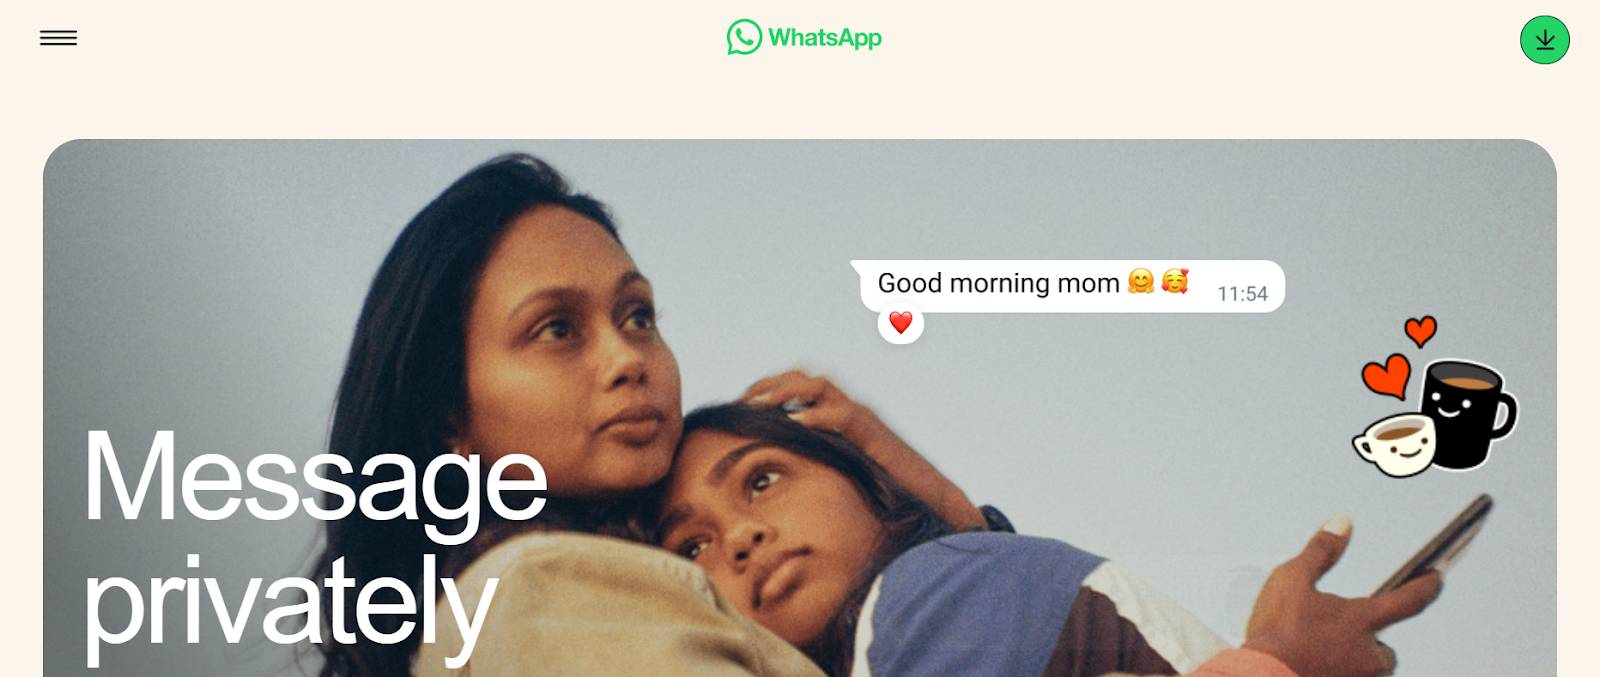 Whatsapp website snapshot highlighting the services it offers.